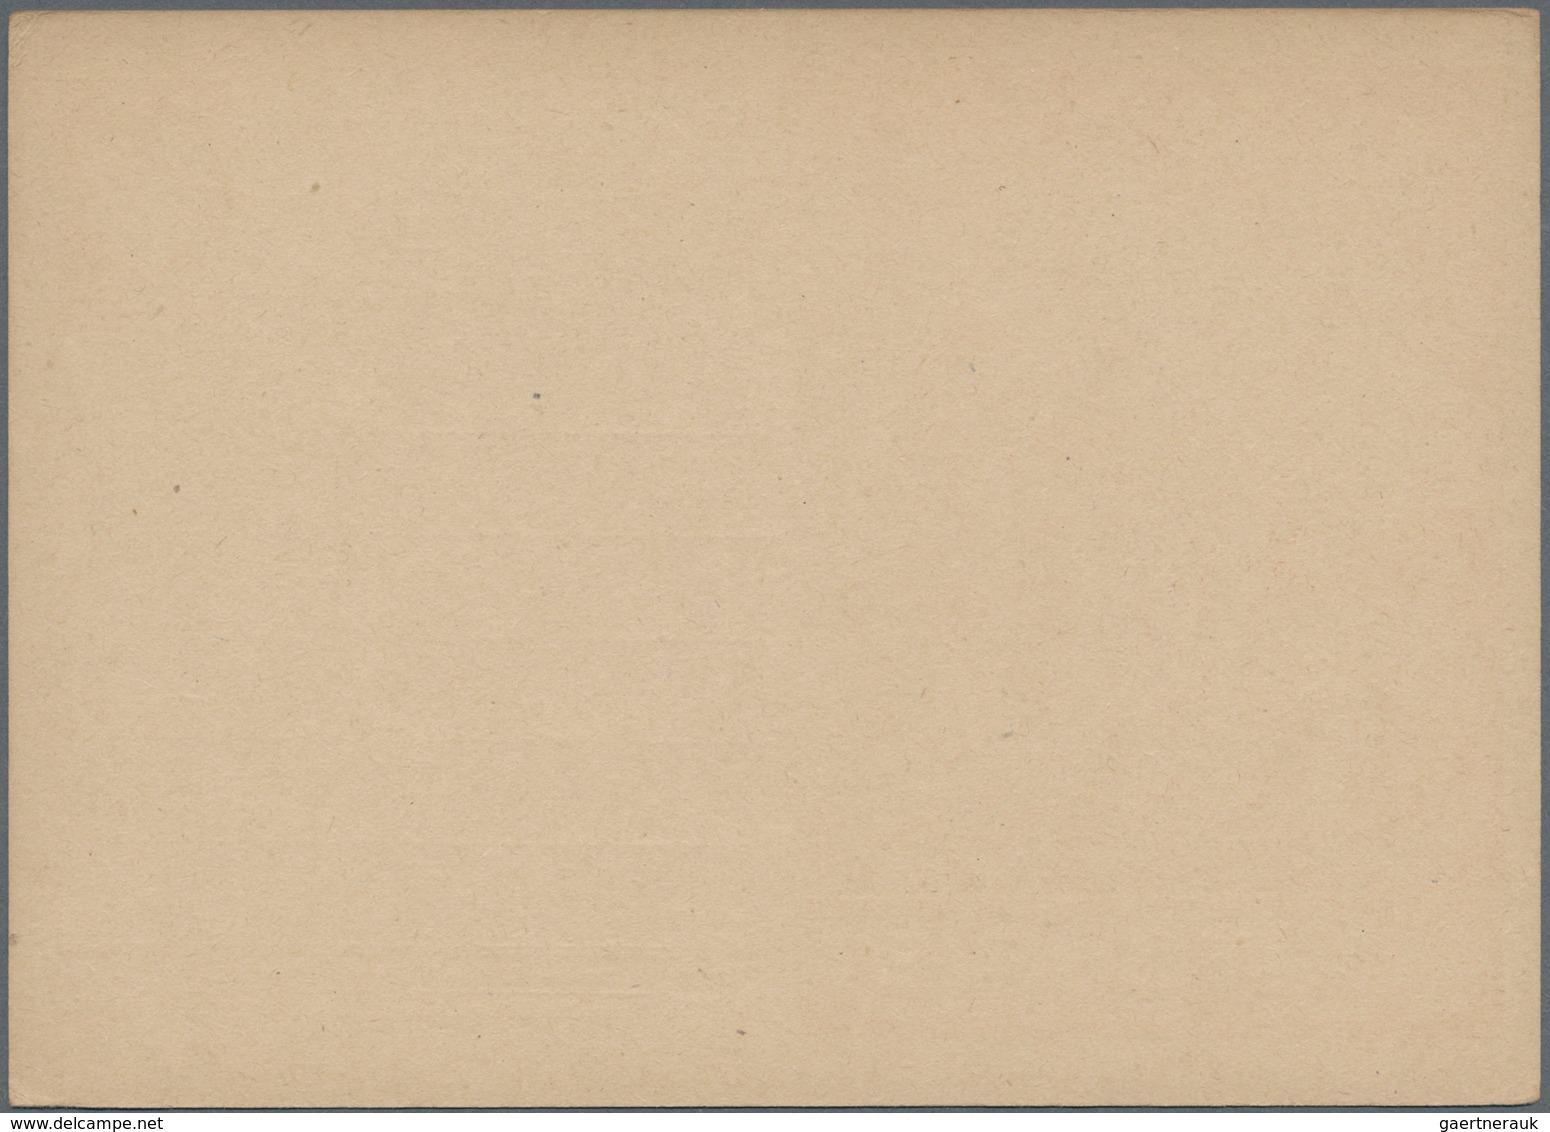 Sowjetunion - Ganzsachen: 1930 Unused Pictured Postal Stationery Card Intourist With Advertisement F - Zonder Classificatie